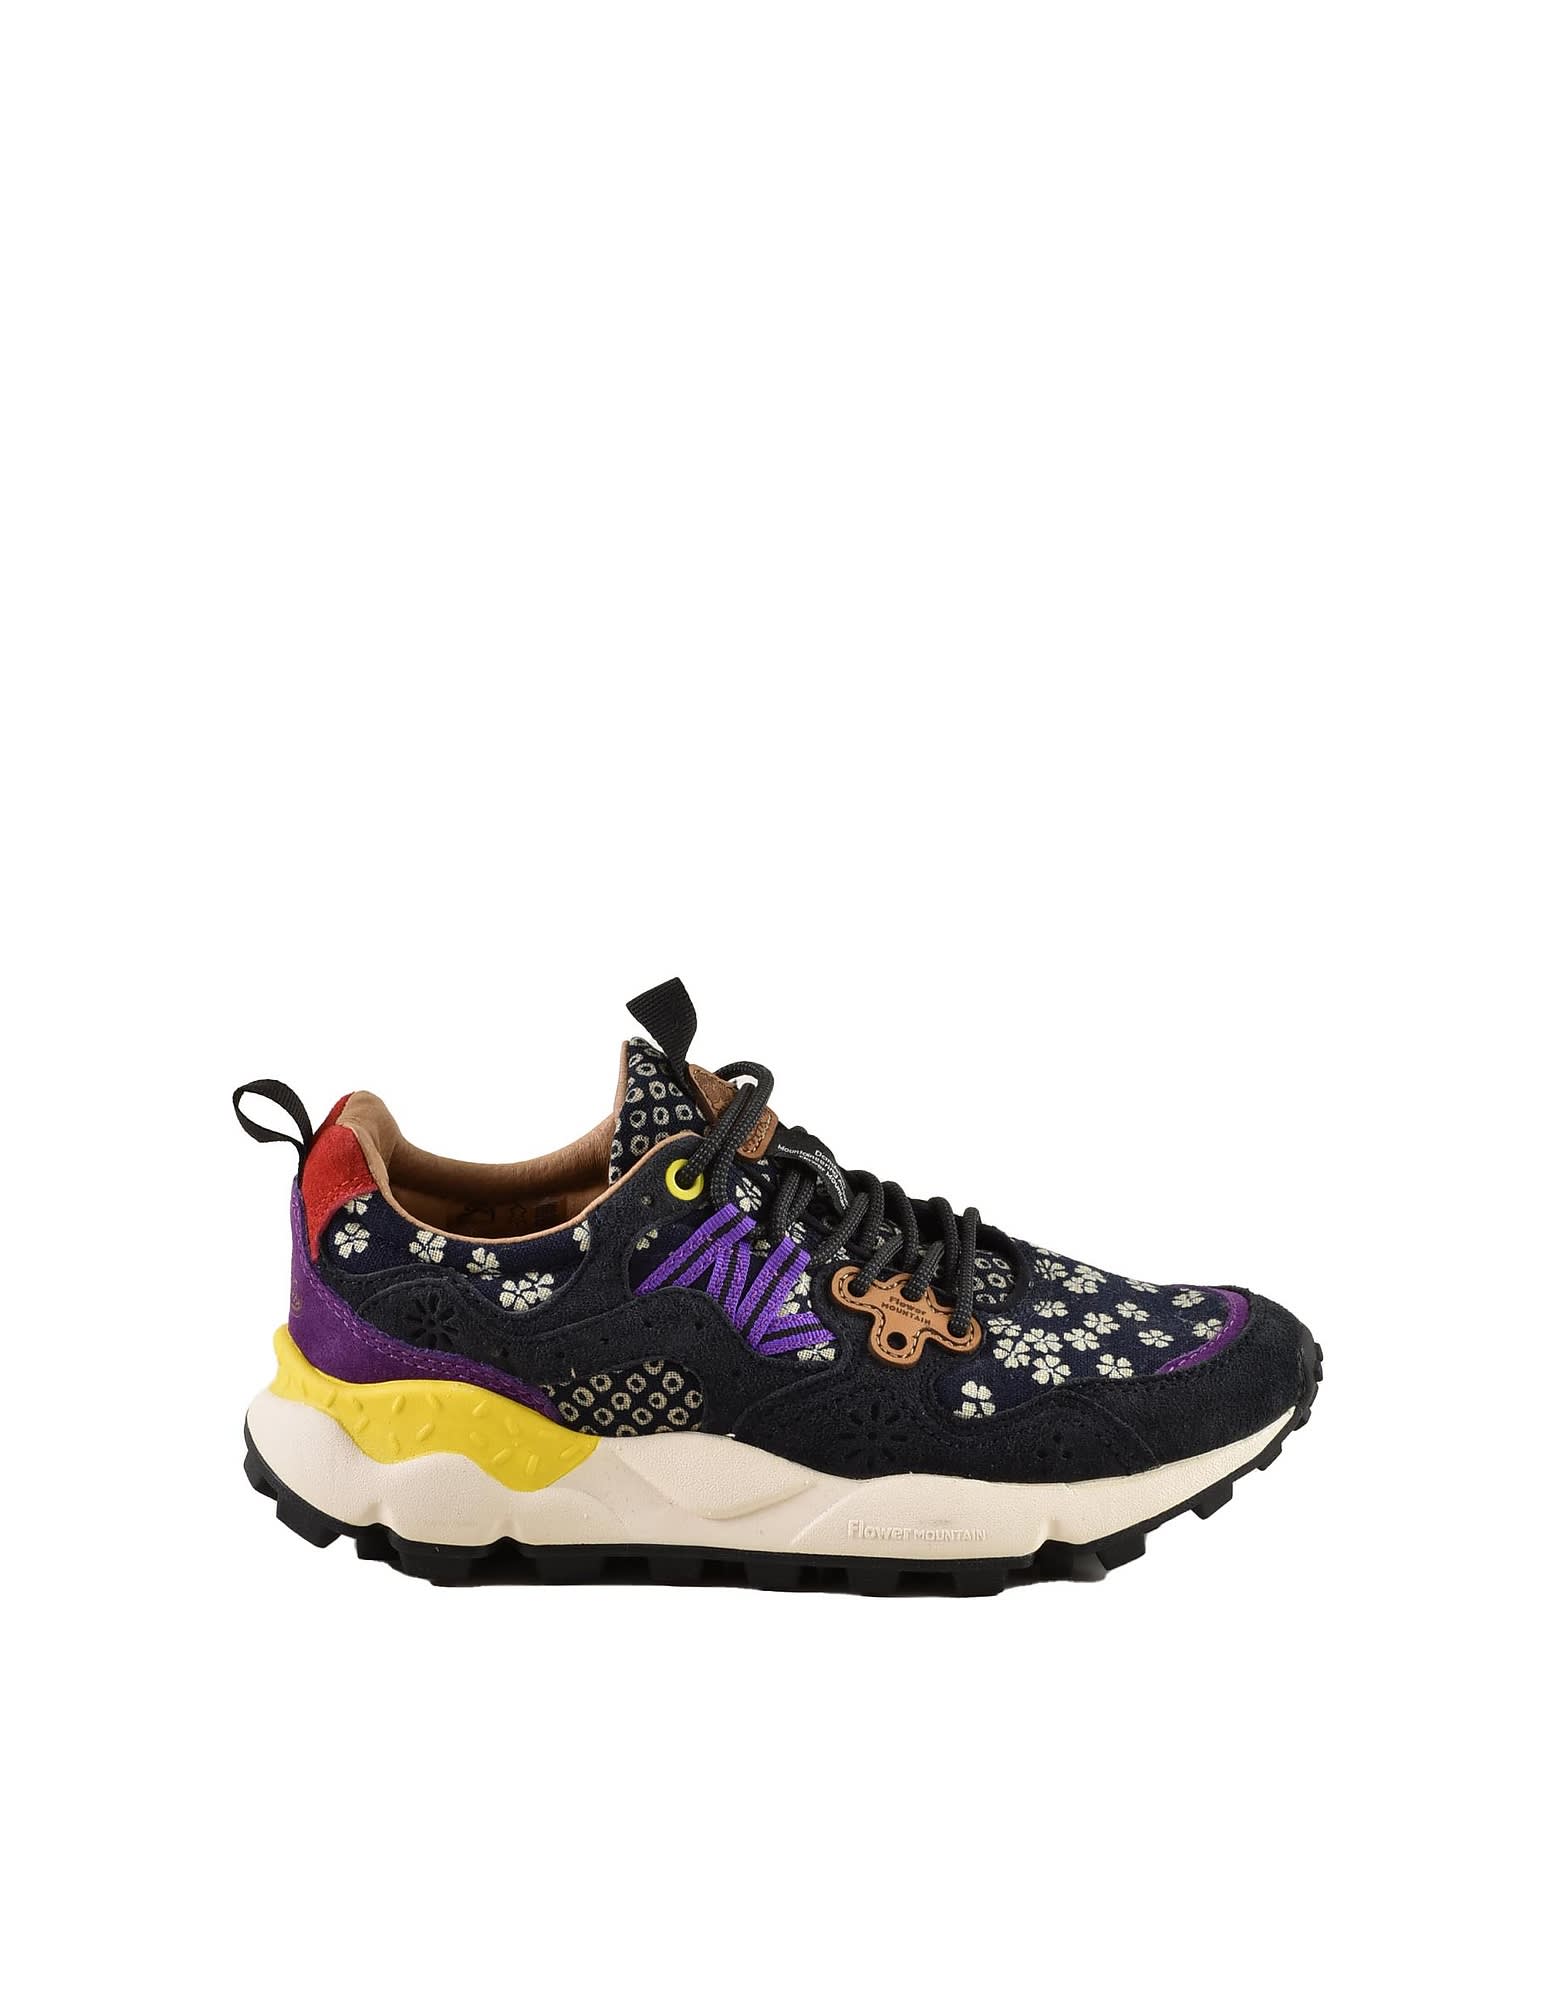 Flower Mountain Womens Anthracite Shoes